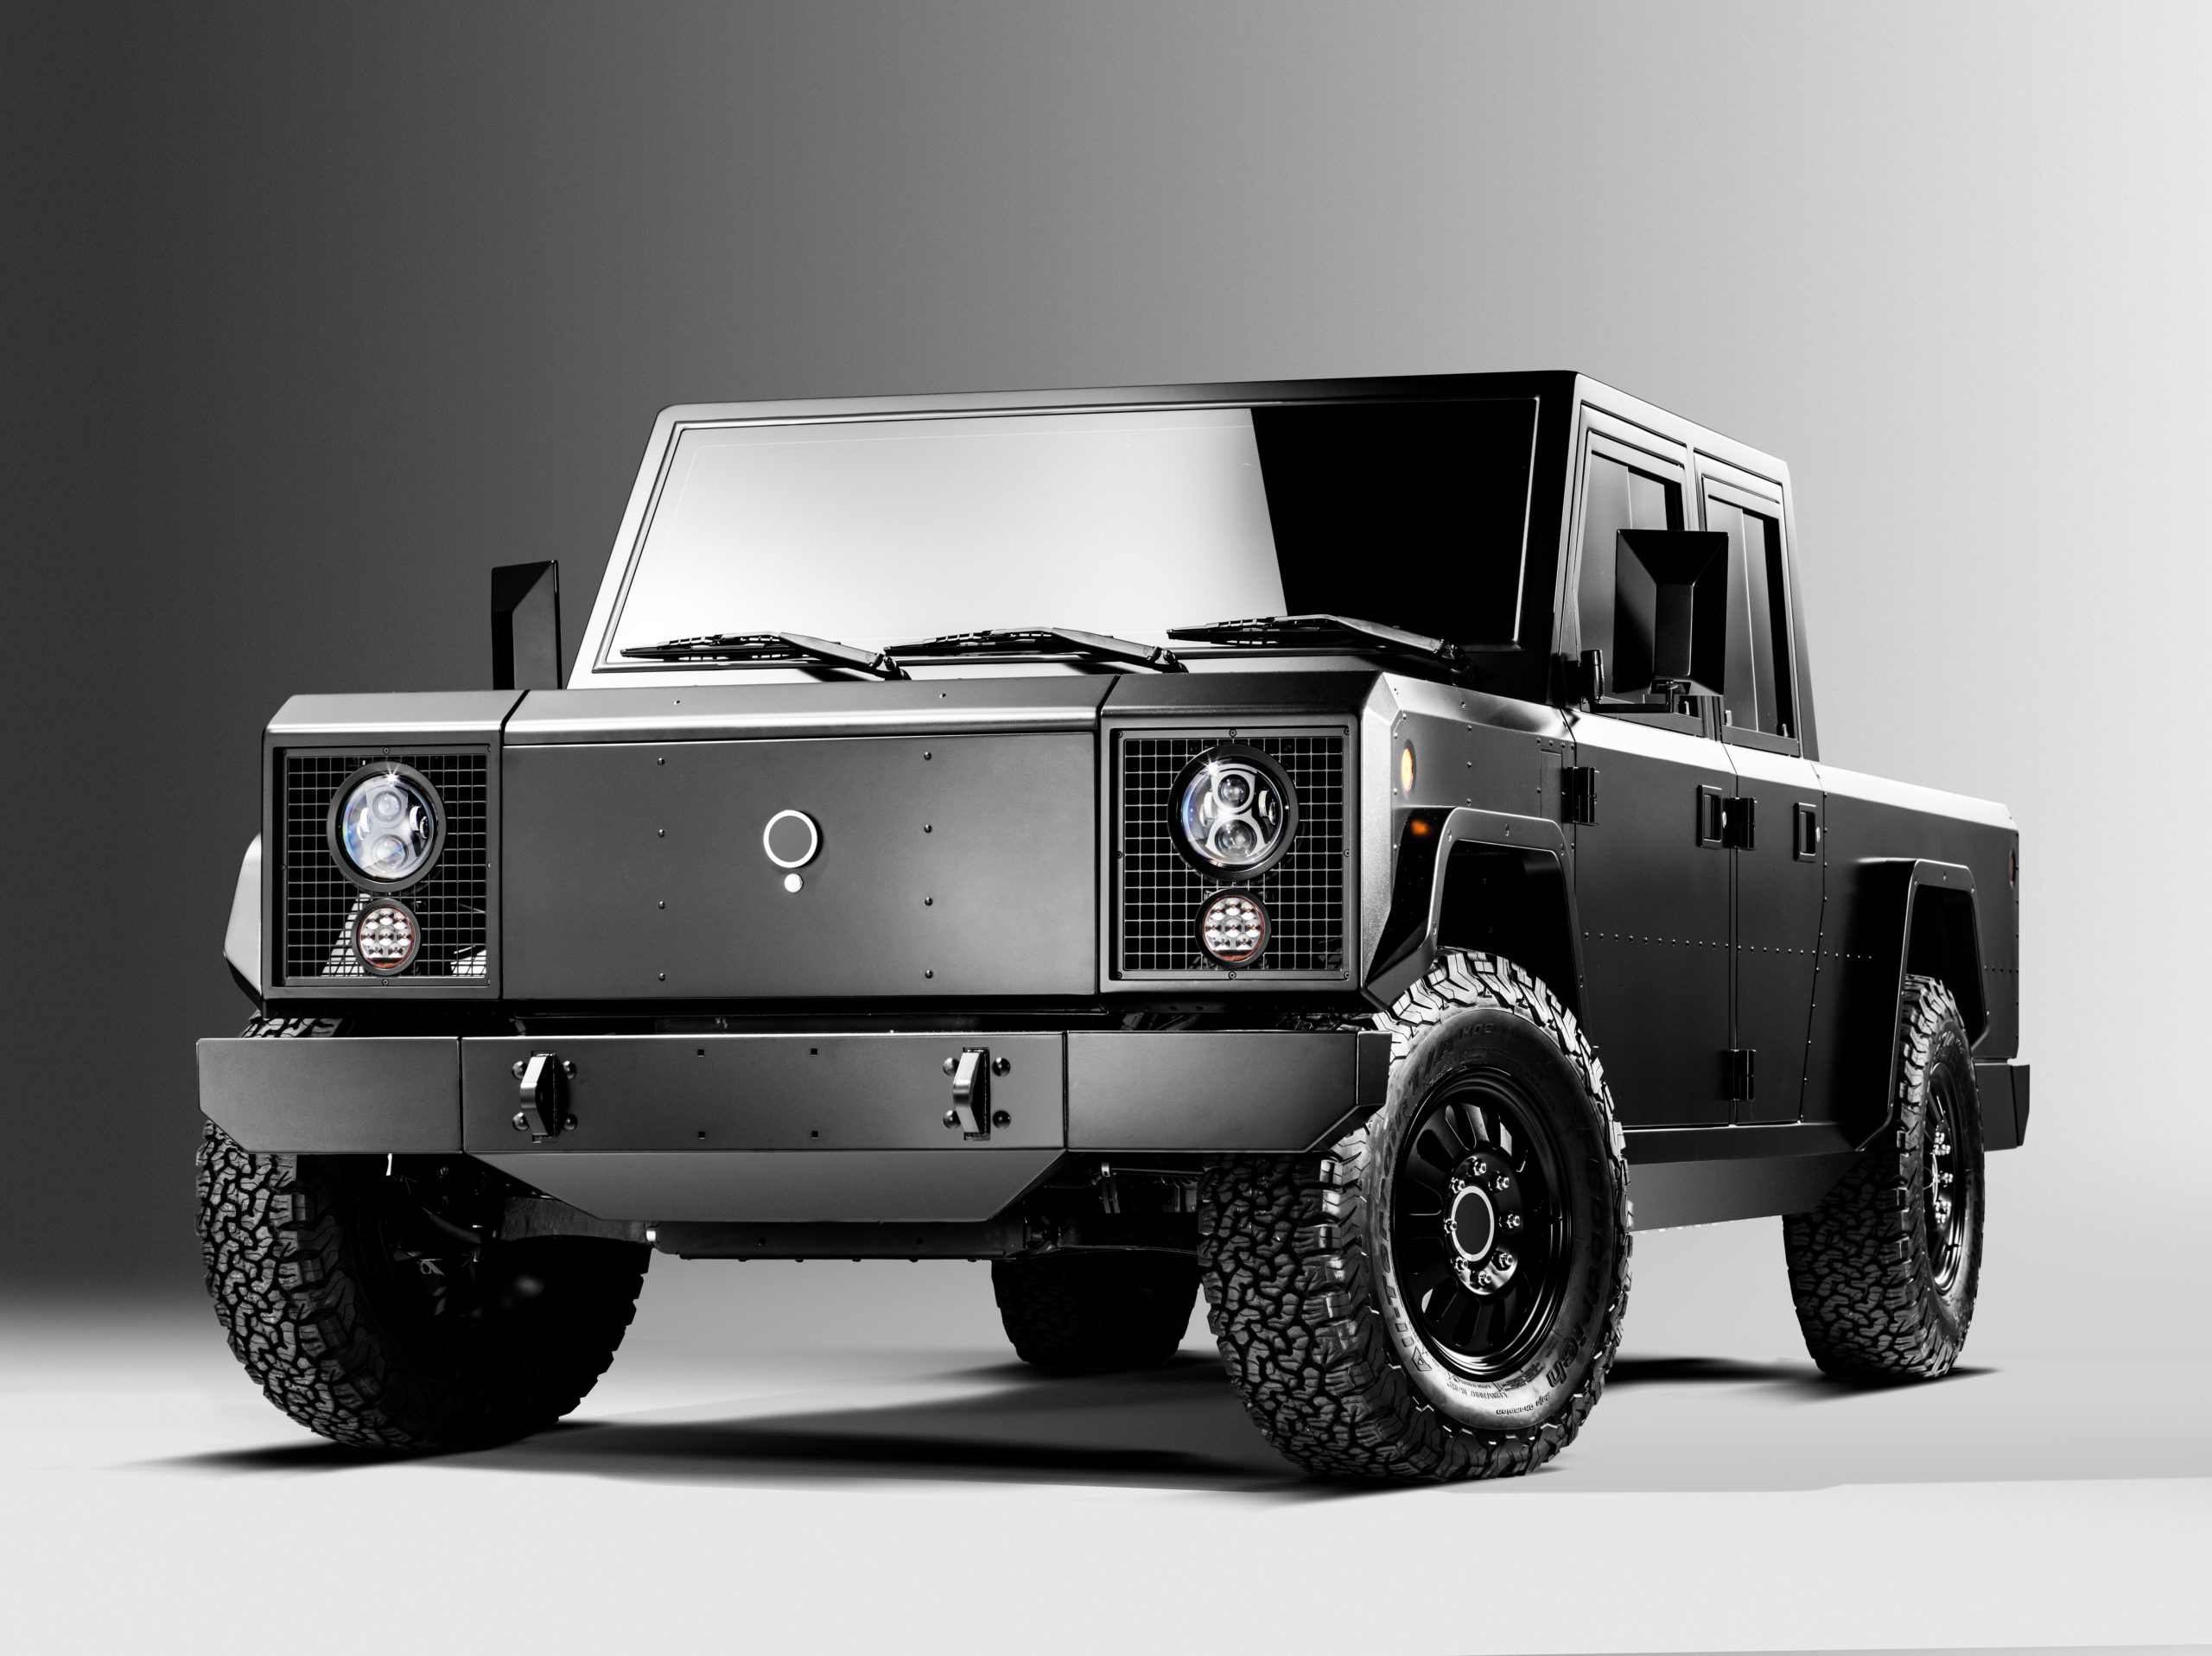 PRESS RELEASE BOLLINGER MOTORS ANNOUNCES PRICING FOR B1 + B2 ELECTRIC